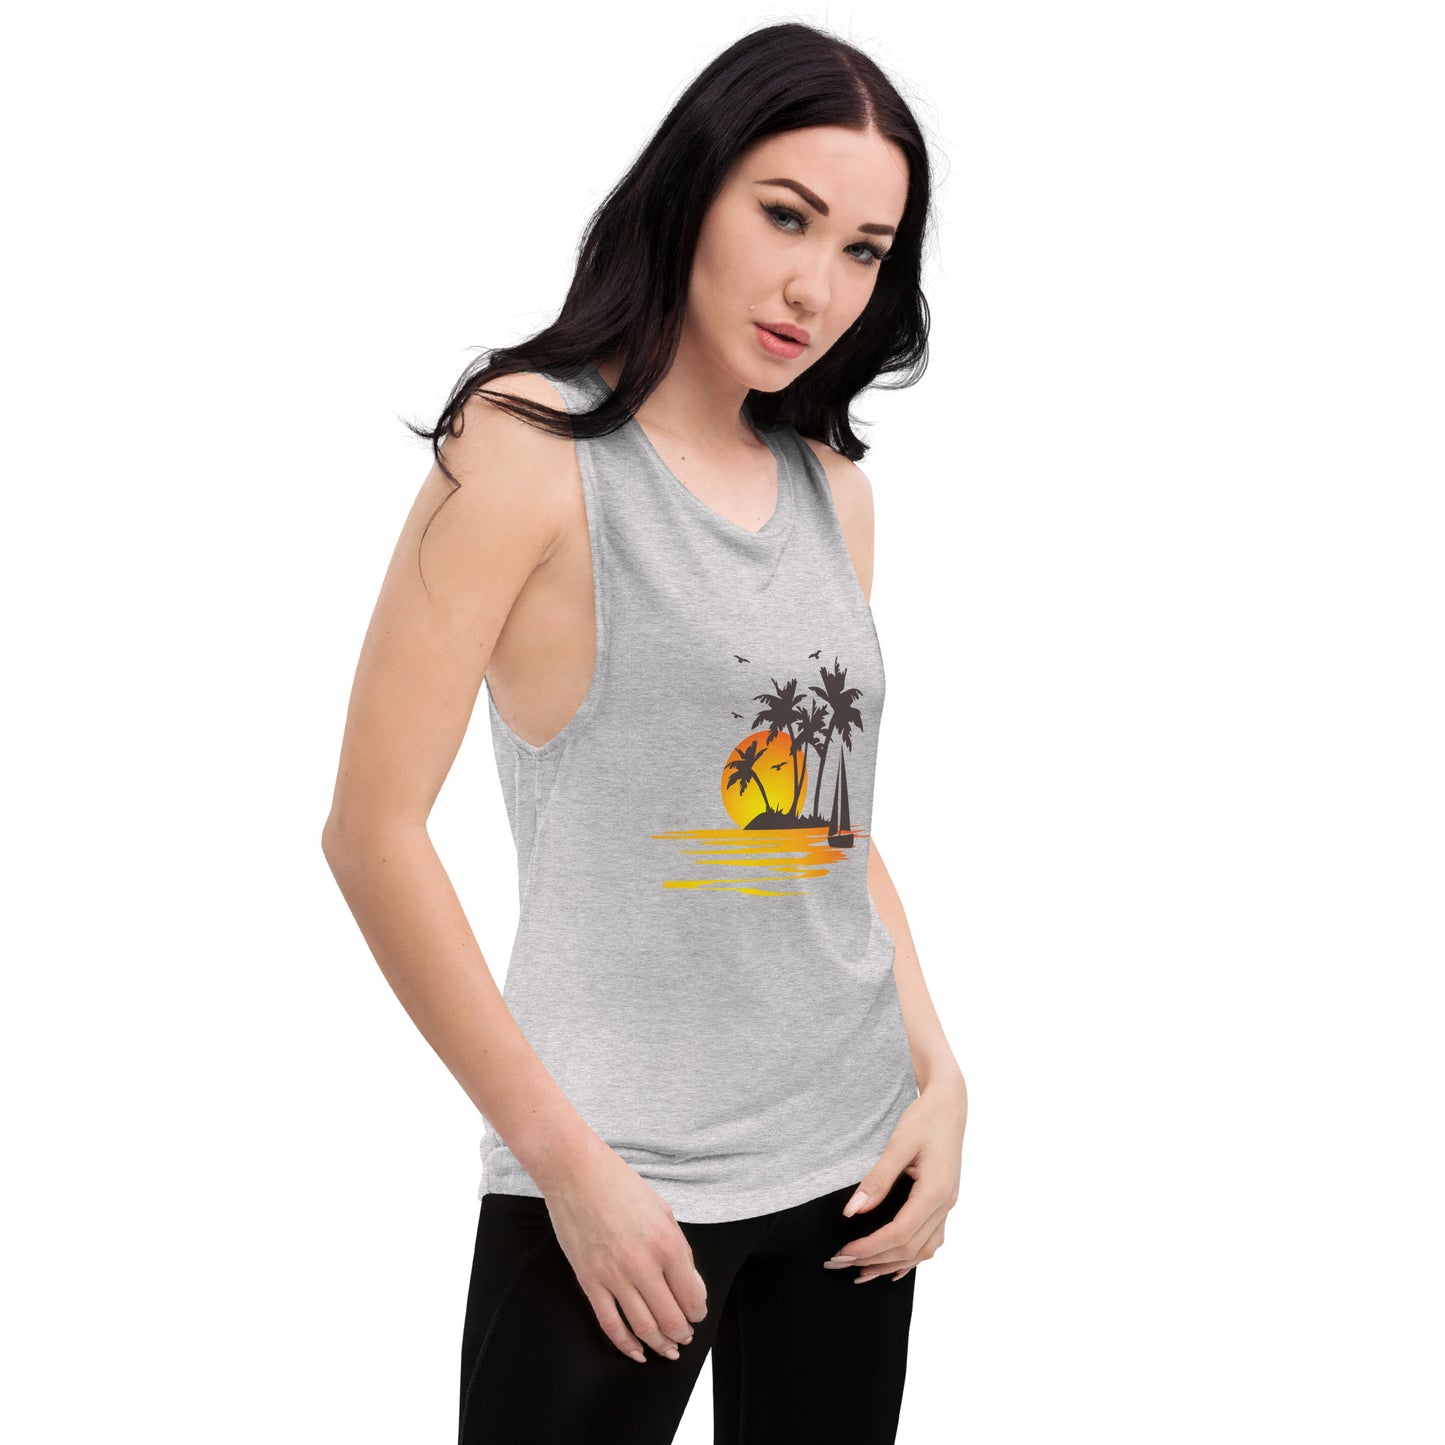 Women with athletic muscle tank with a picture of sunset, palm trees and sailboat